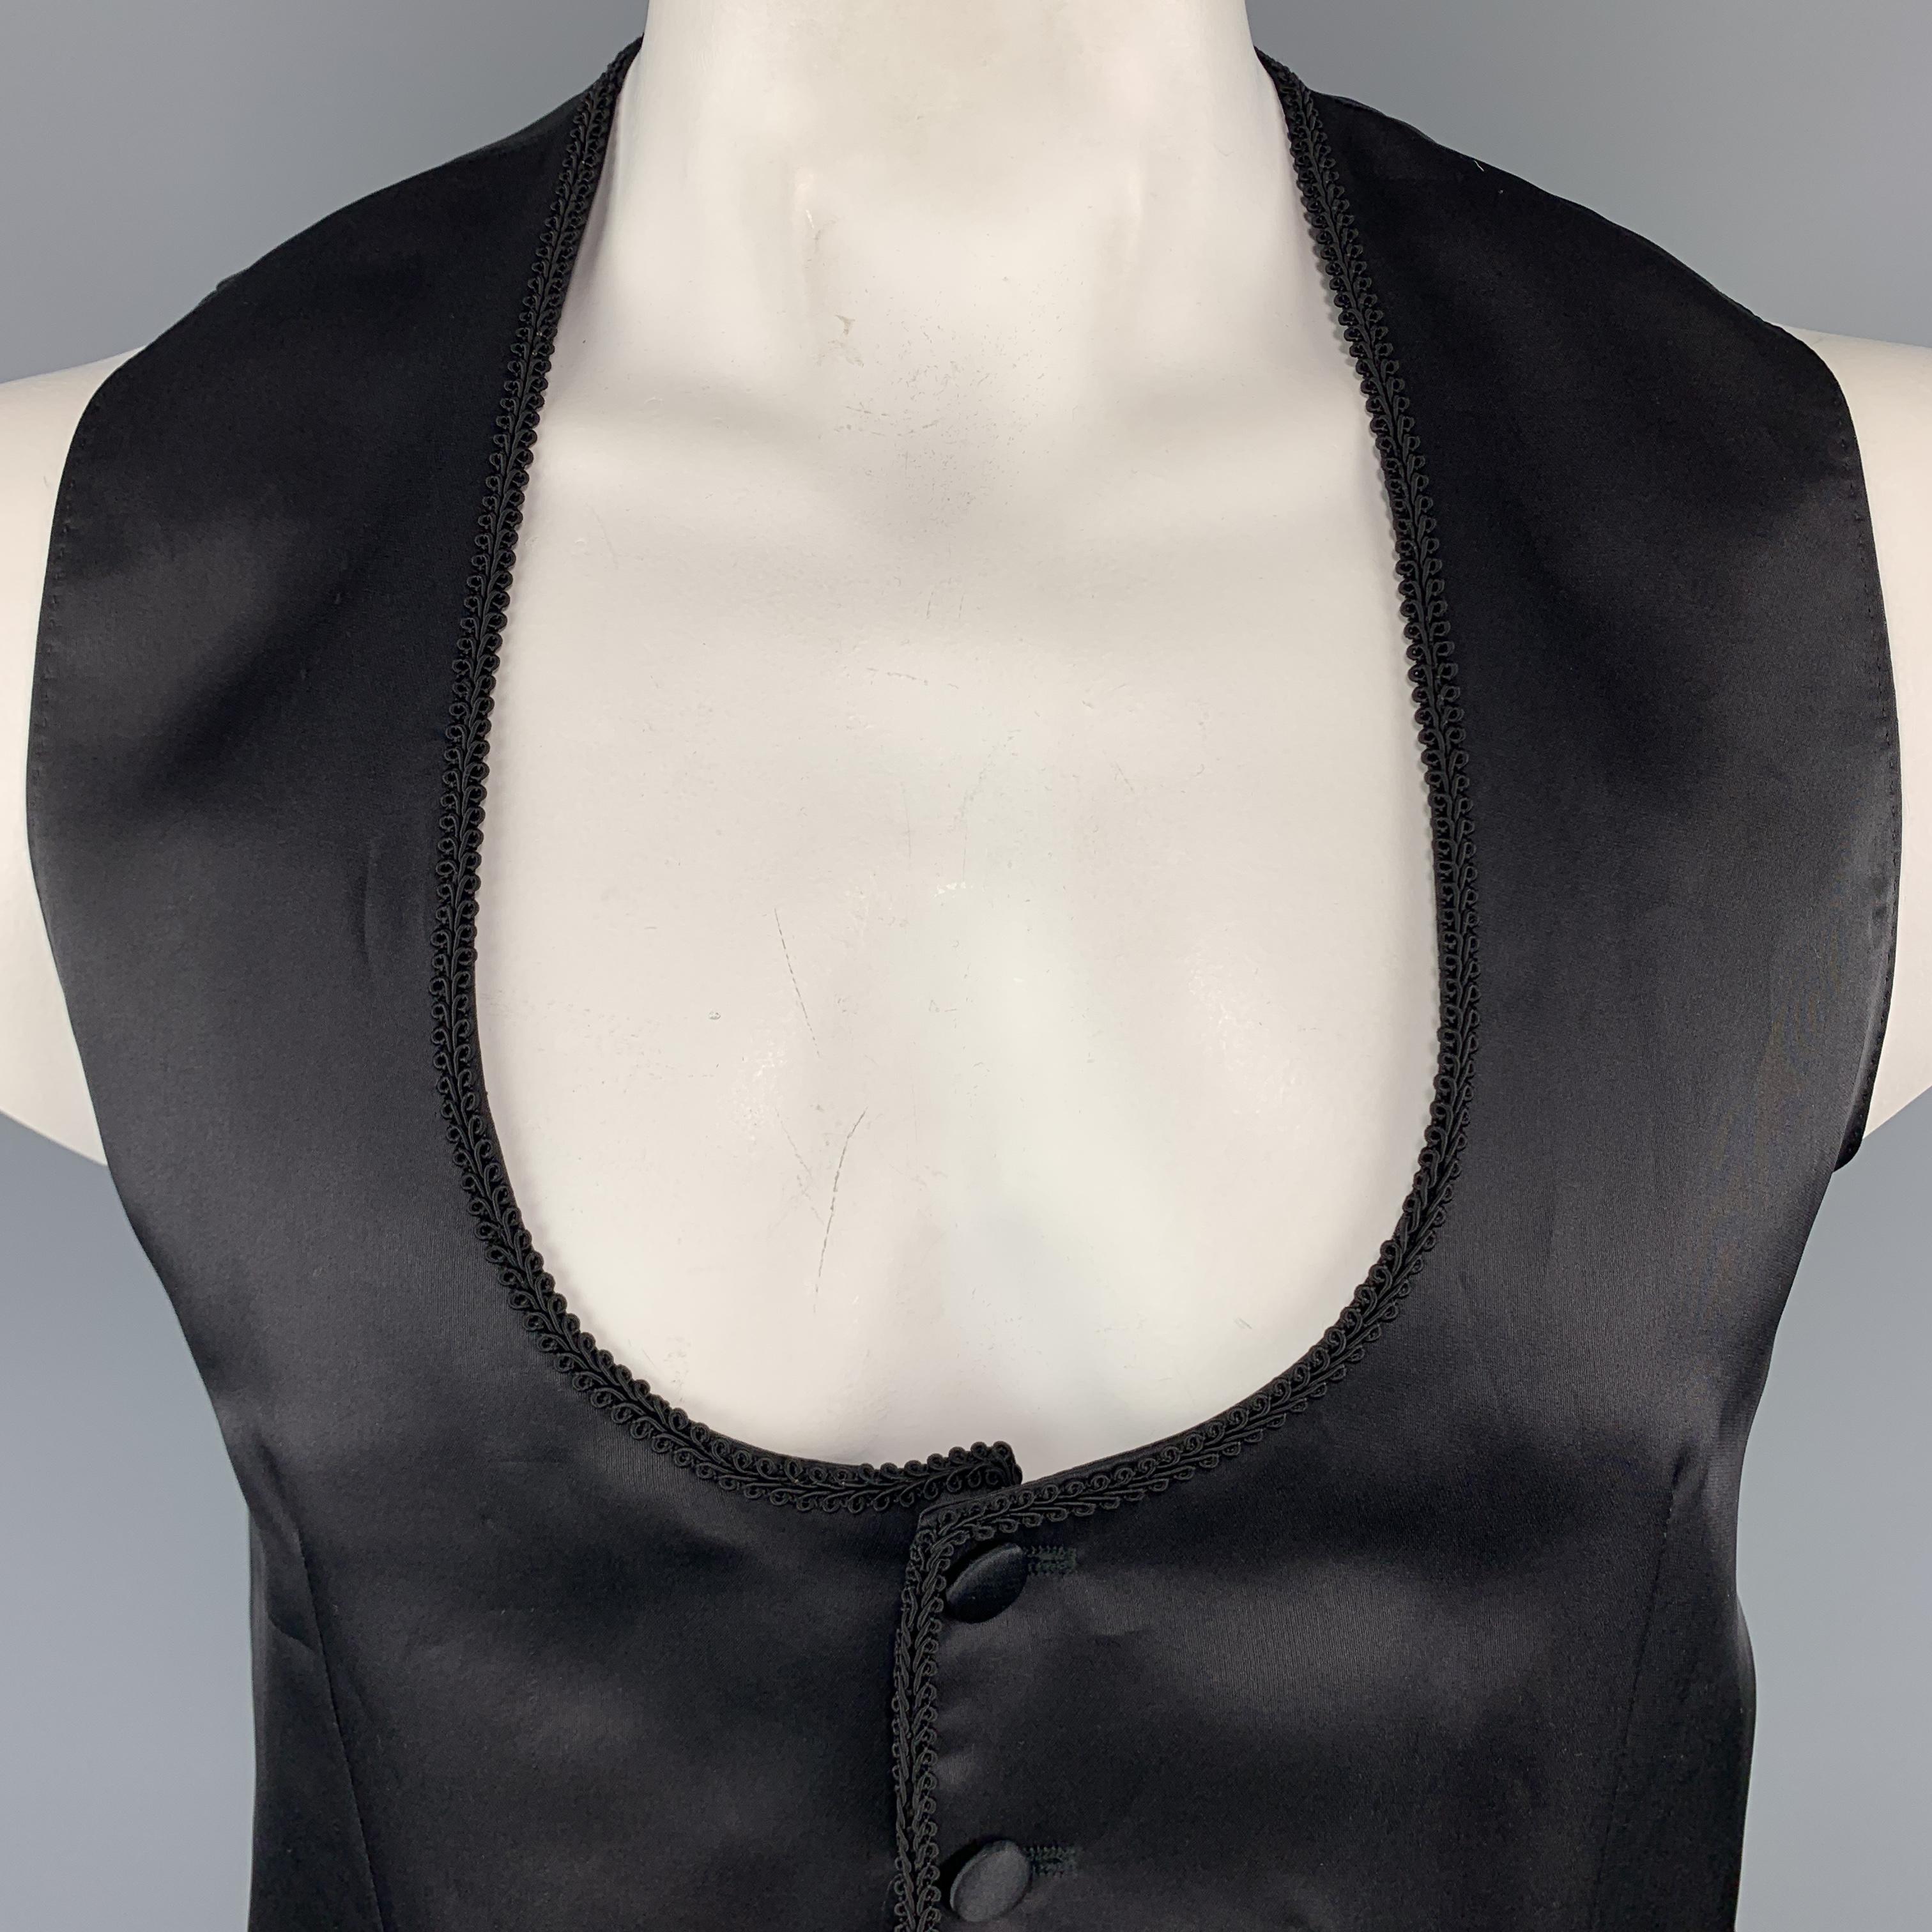 DOLCE & GABBANA Vest comes in a black tone in a solid silk / wool material, with a round collar, a trim, covered buttons, slit pockets, single breasted, and a belt at back. Made in Italy.

Excellent Pre-Owned Condition.
Marked: IT